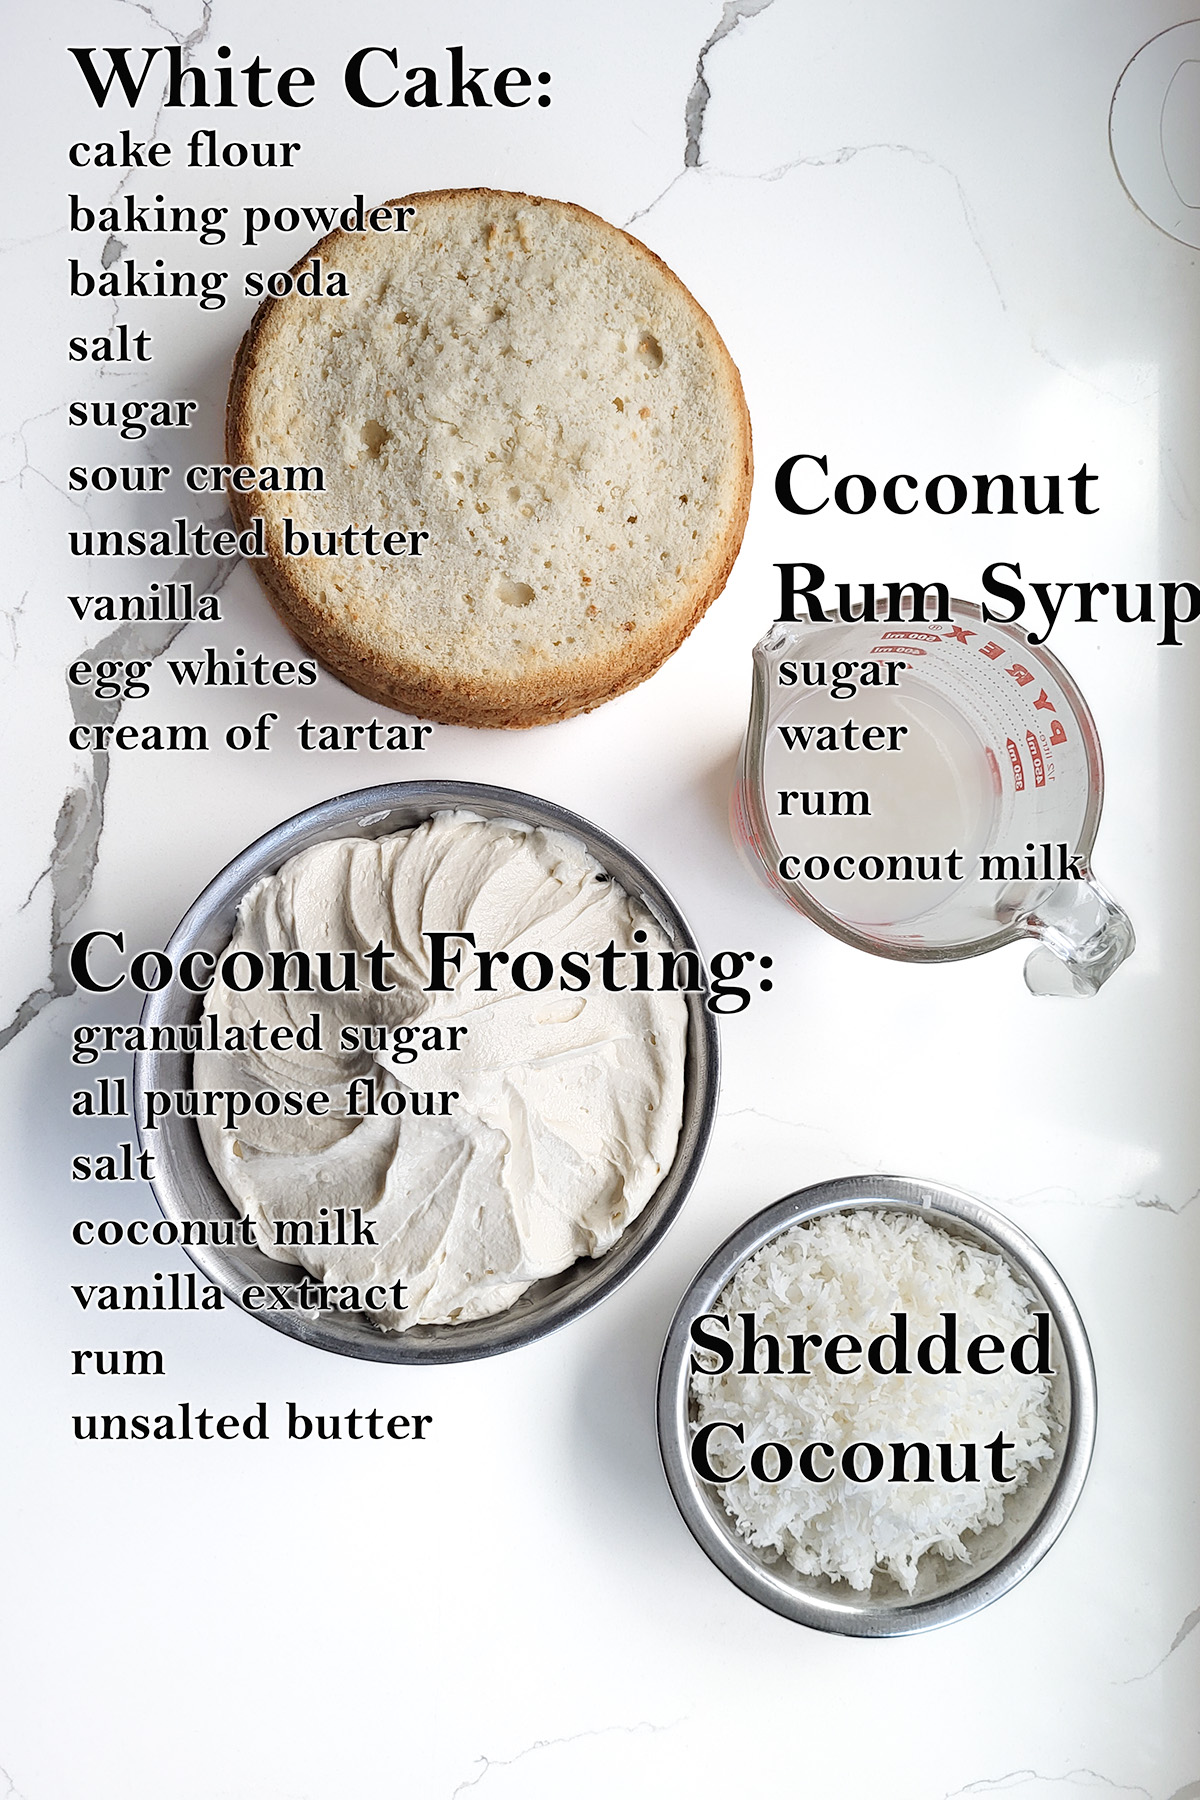 ingredients for making coconut cake on a white surface.